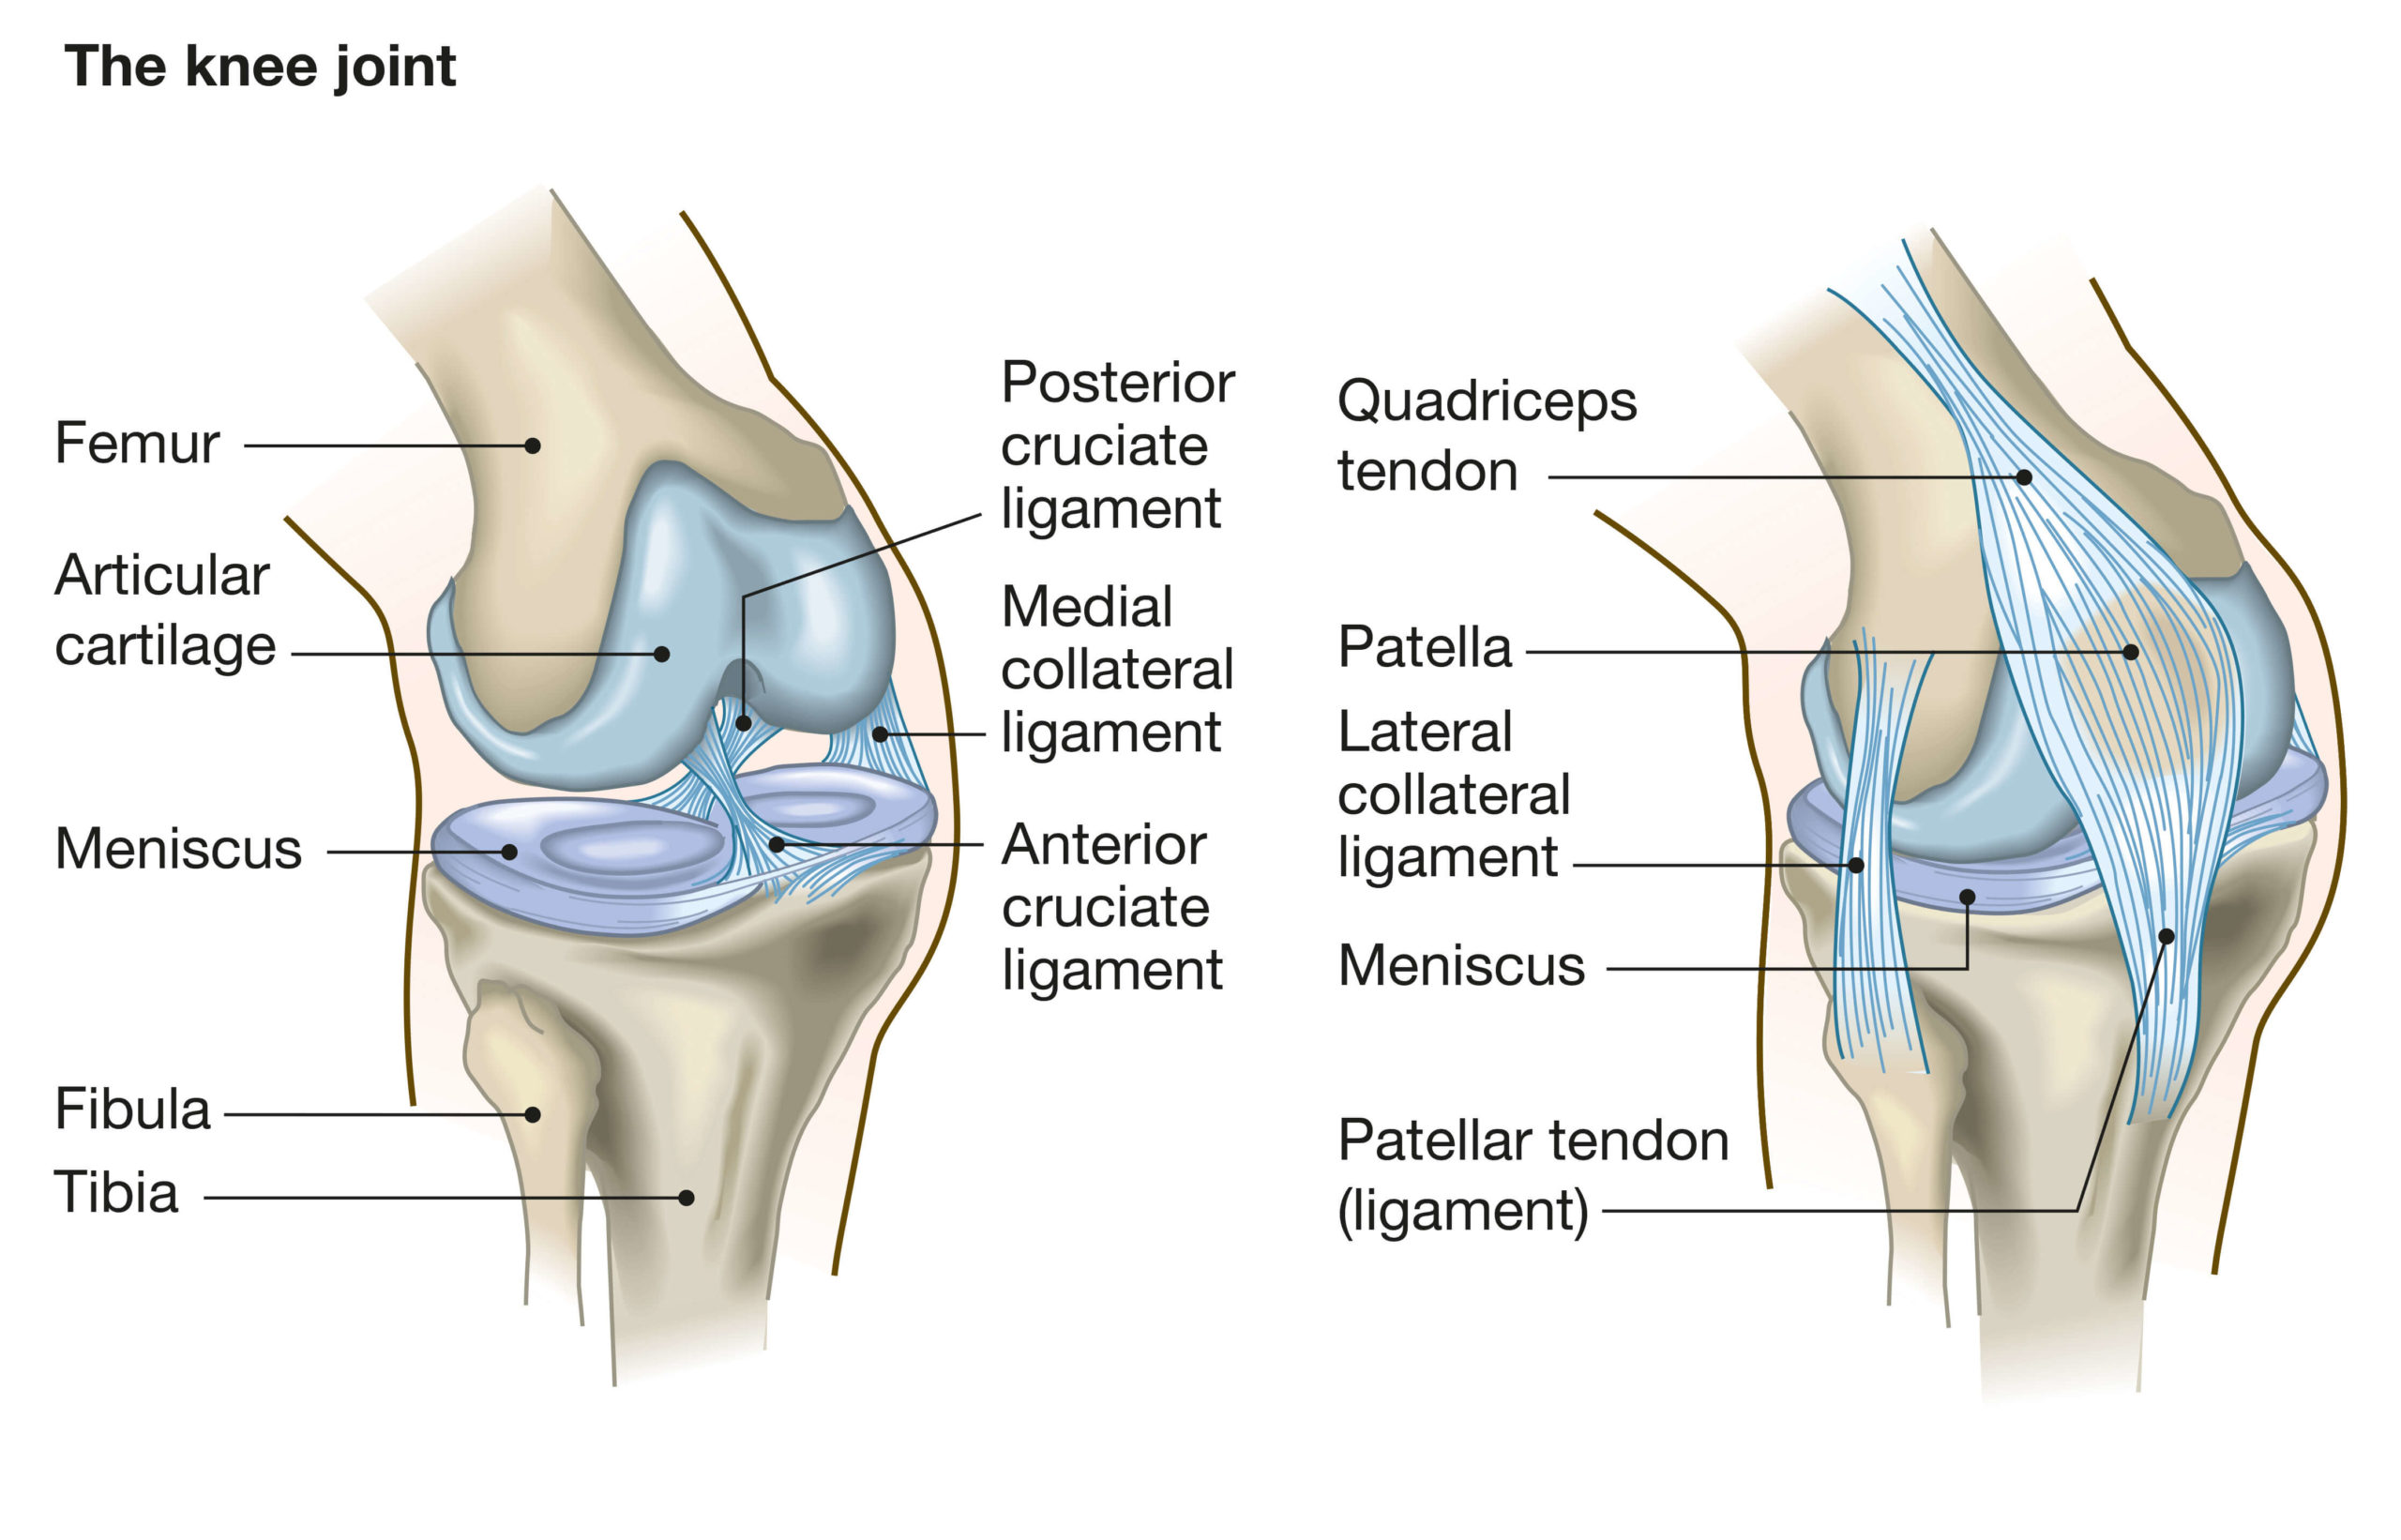 A marked up illustration of the knee joint